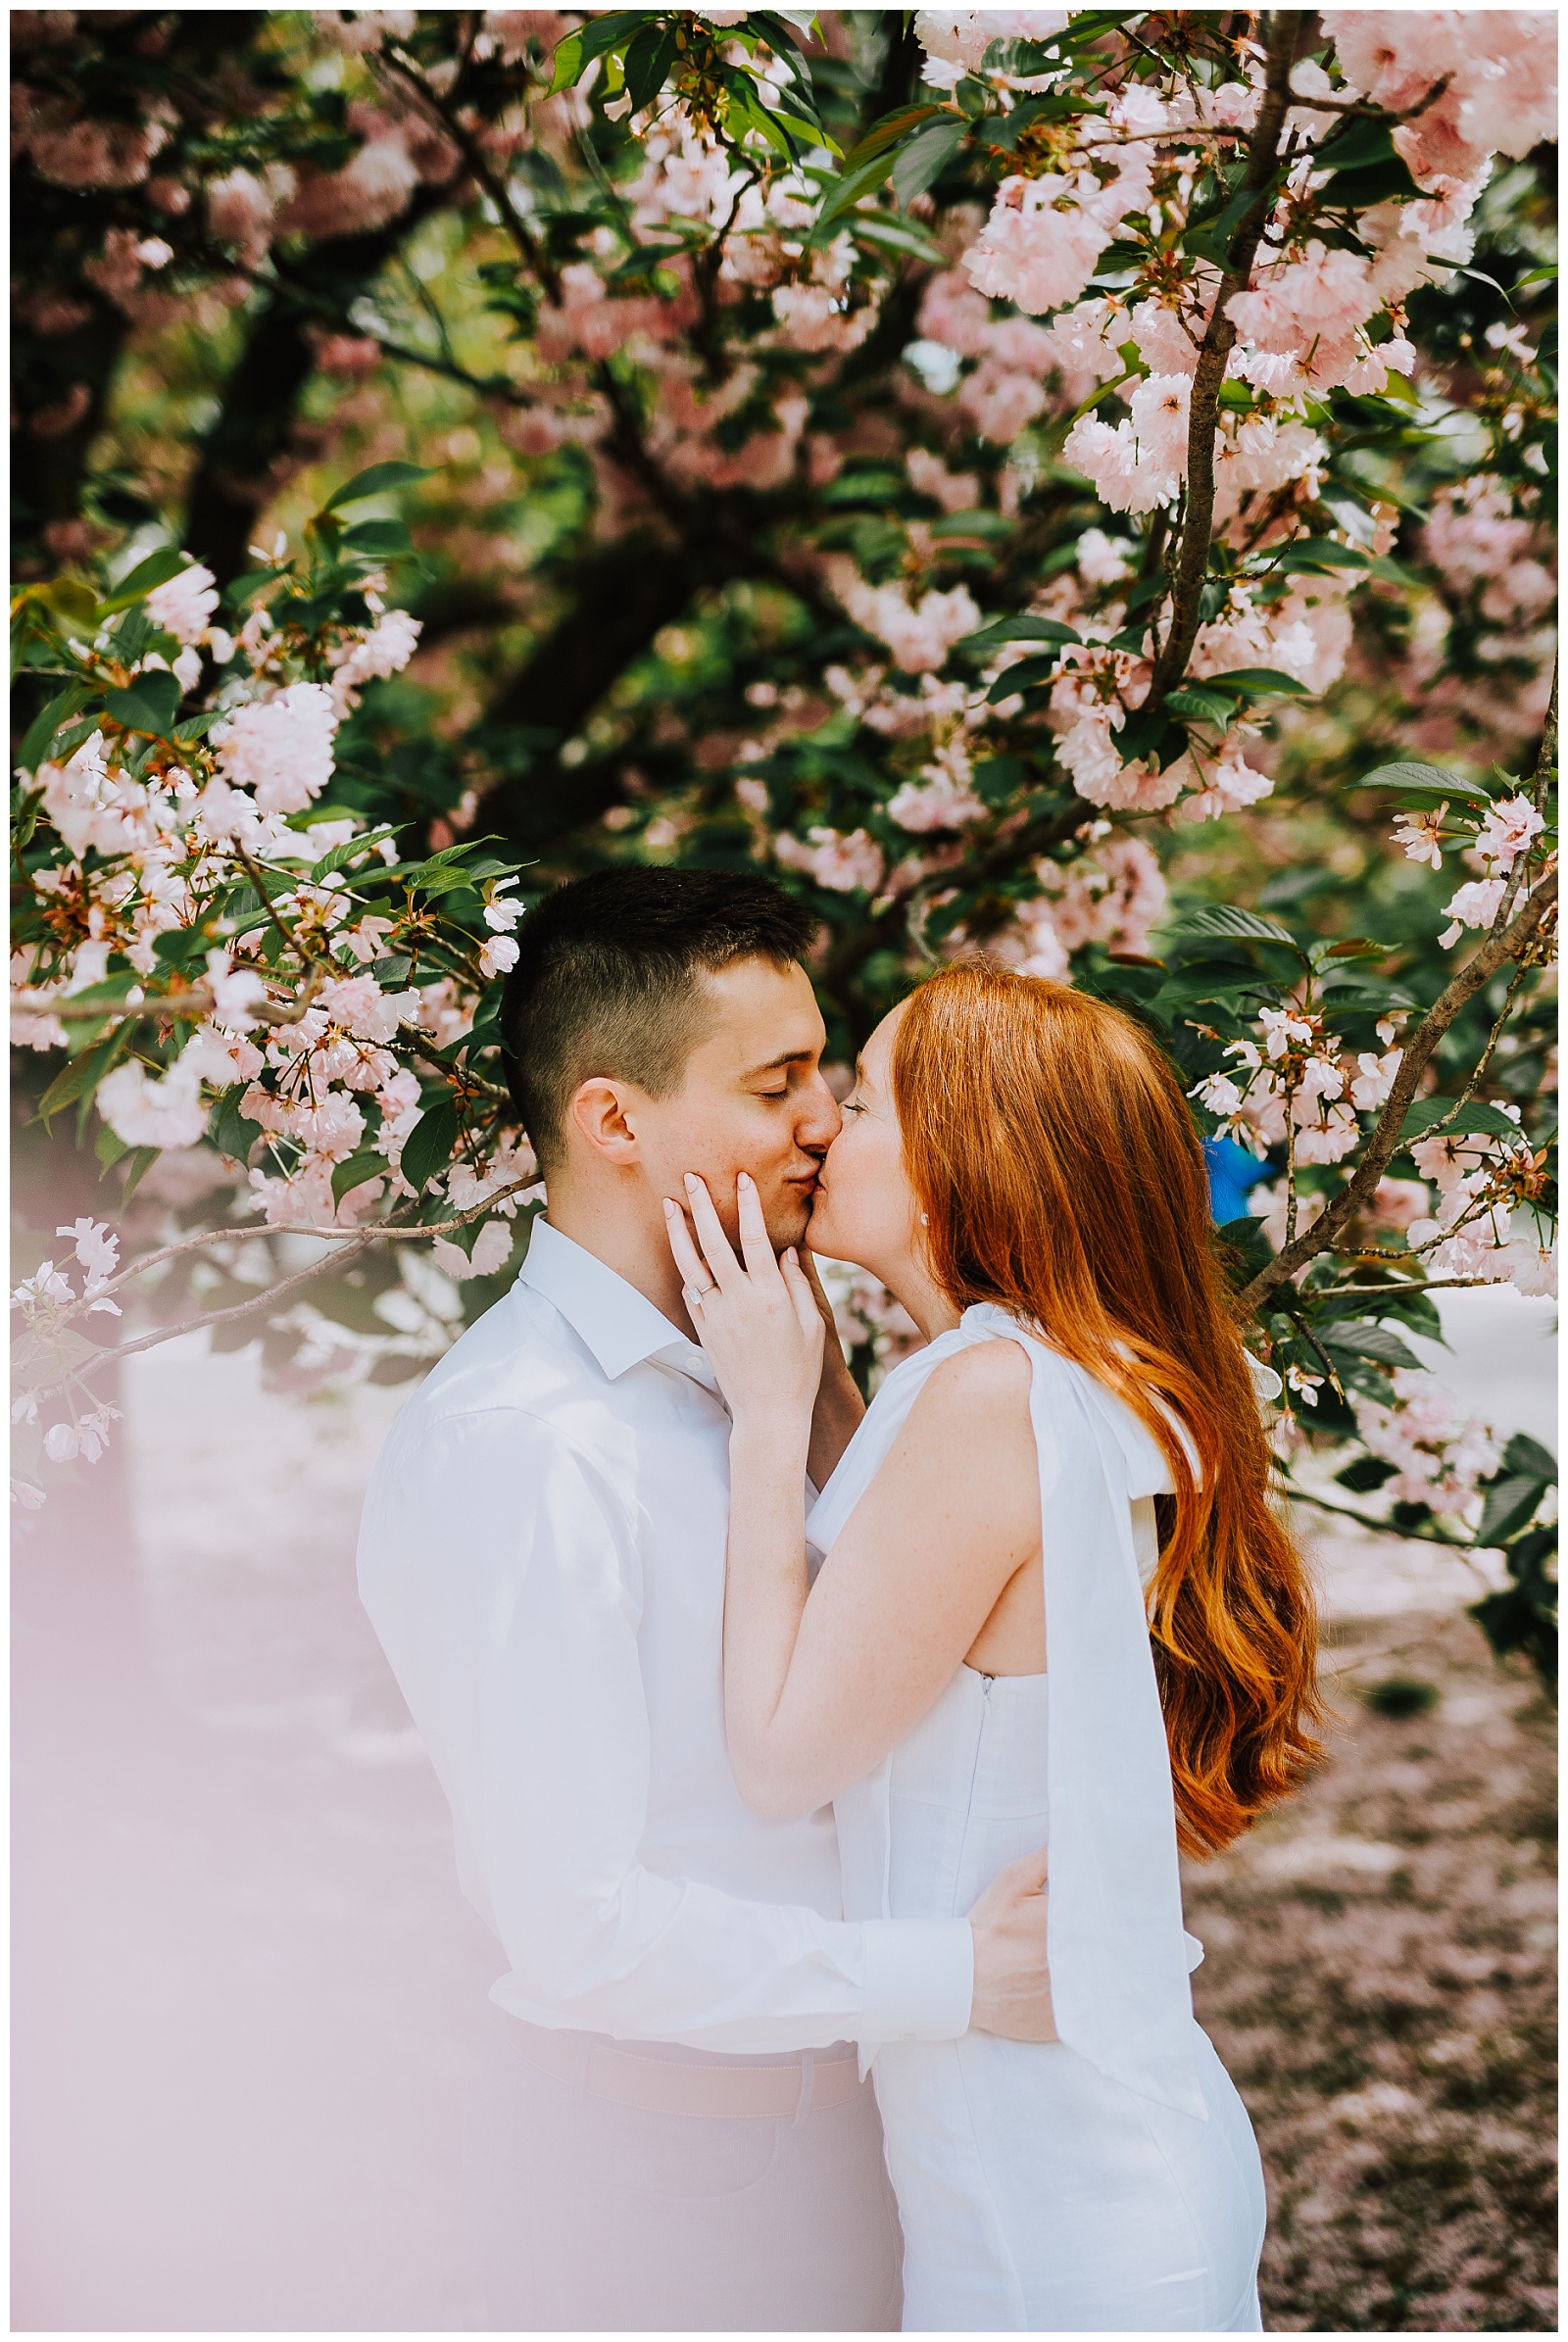 Classic Spring Central Park Engagement Session